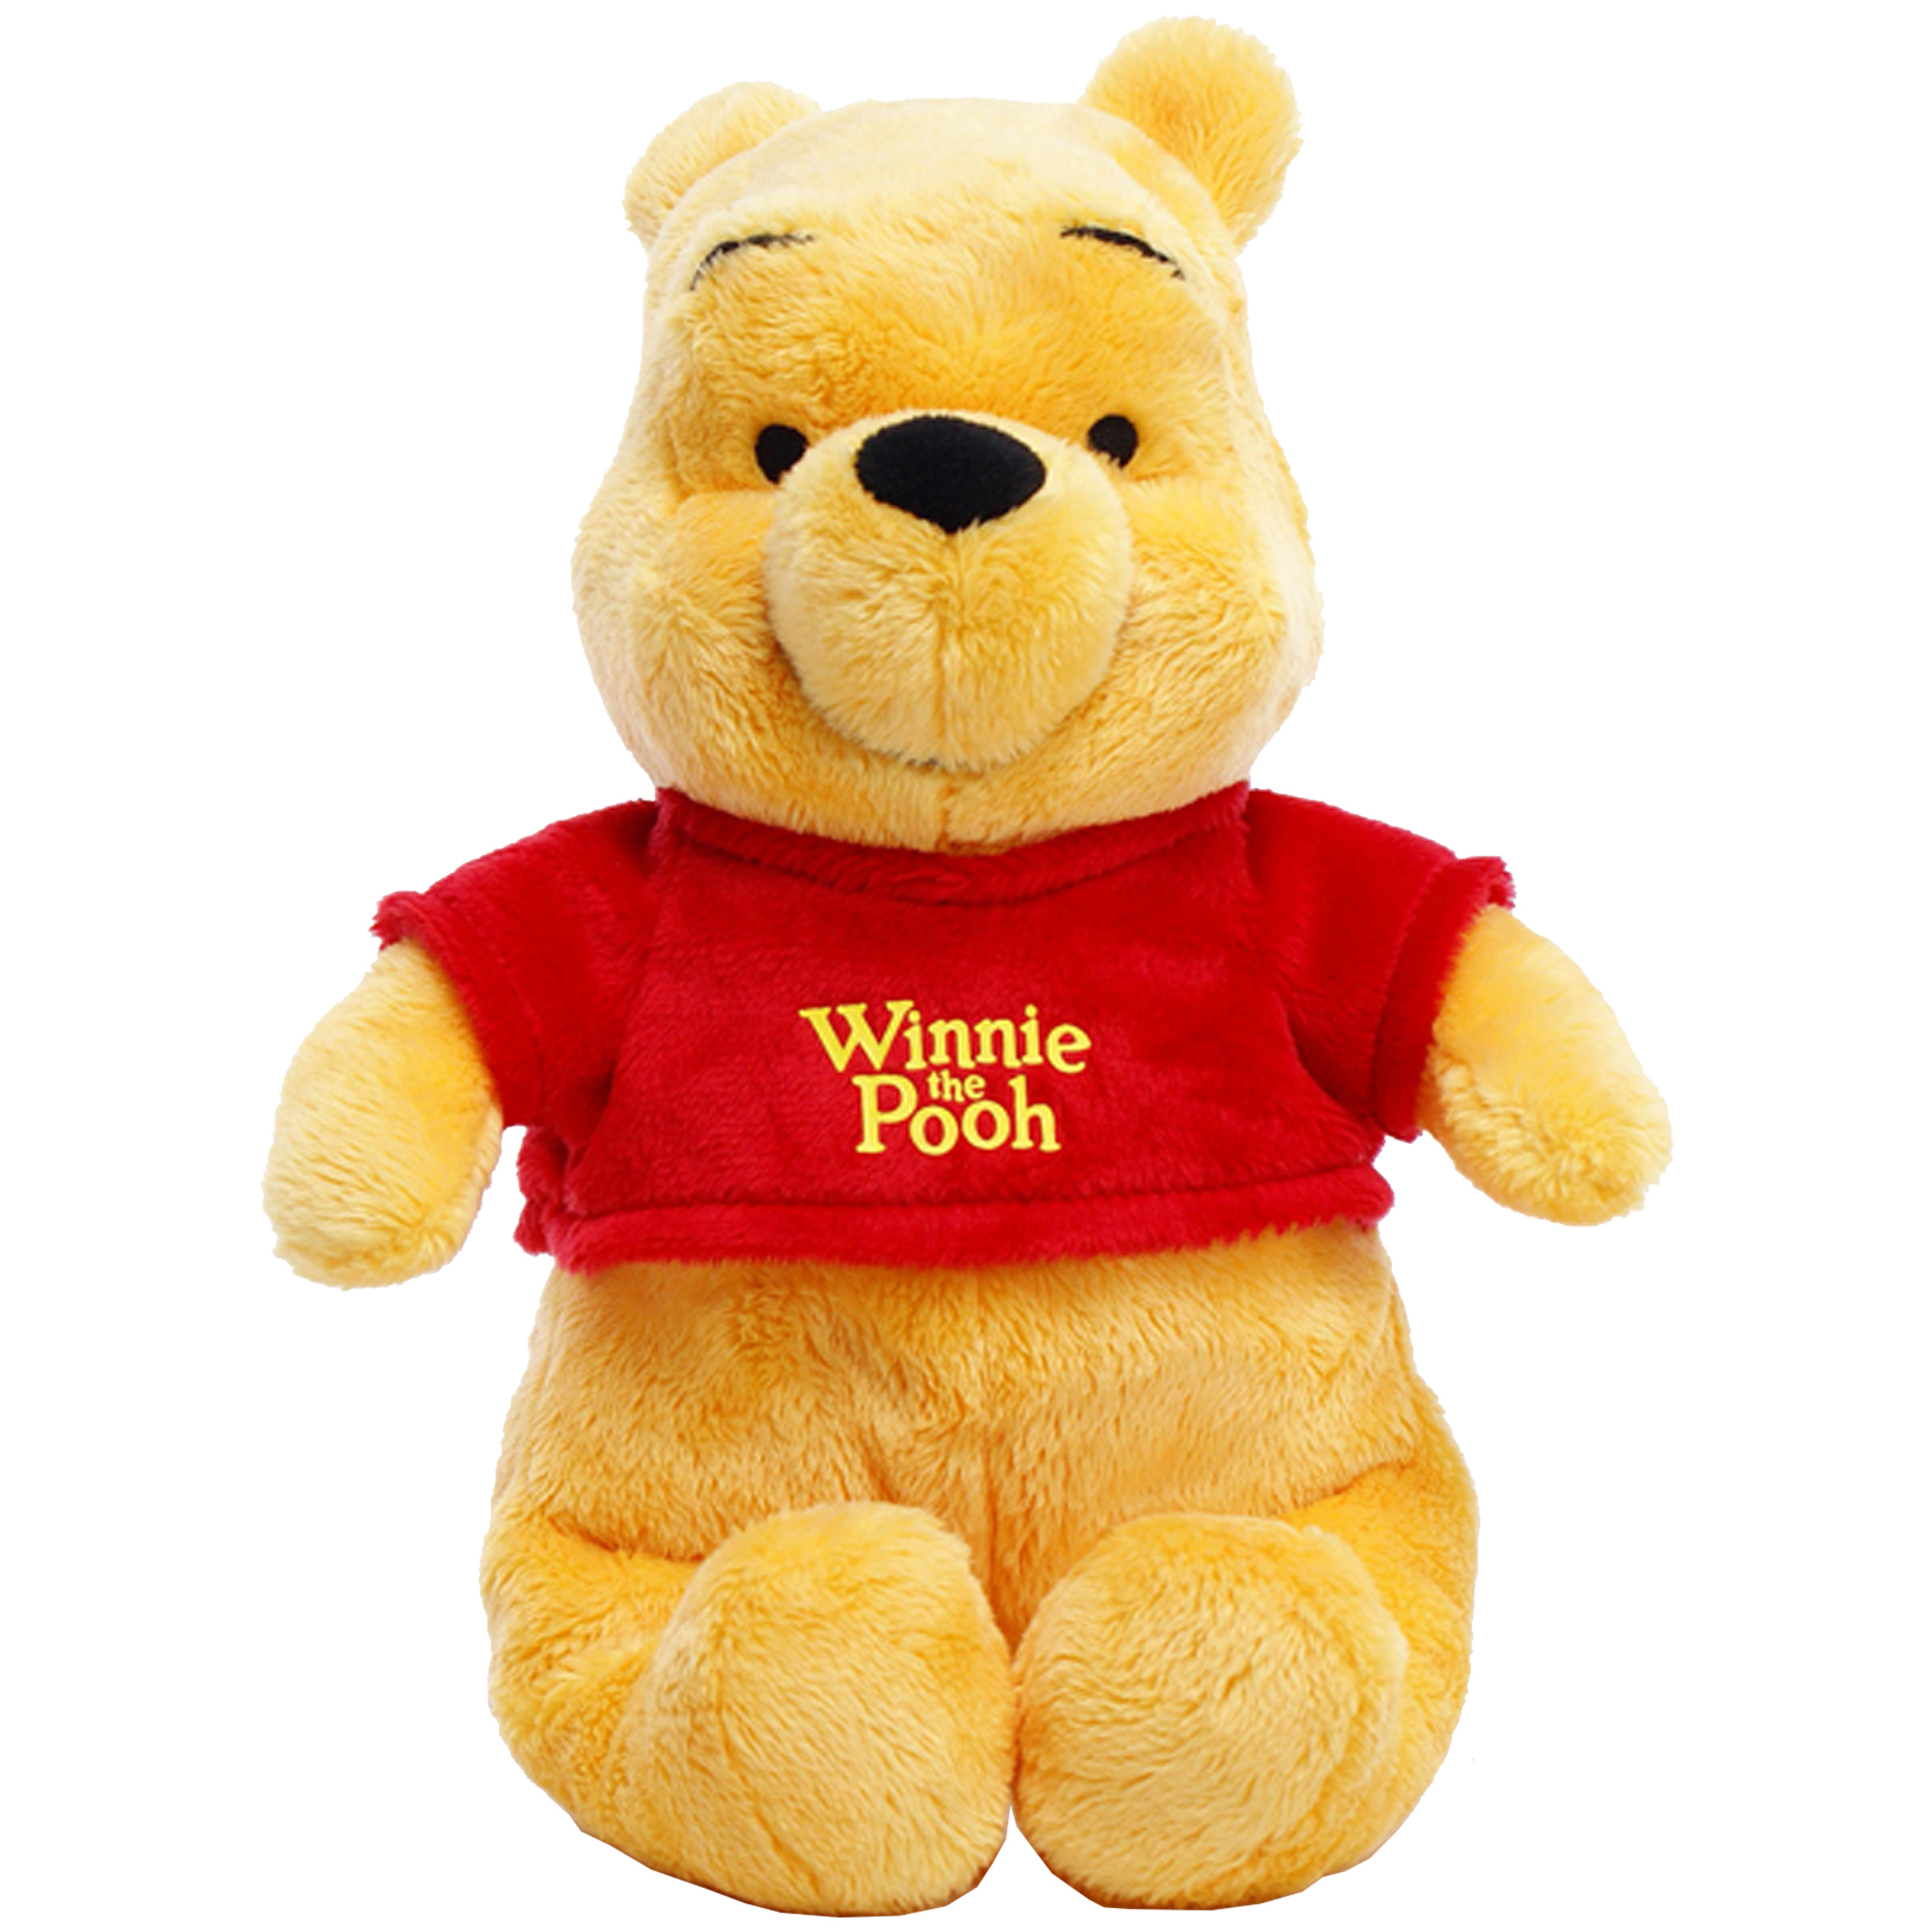 Winnie the Pooh Giant Pooh Soft Toy